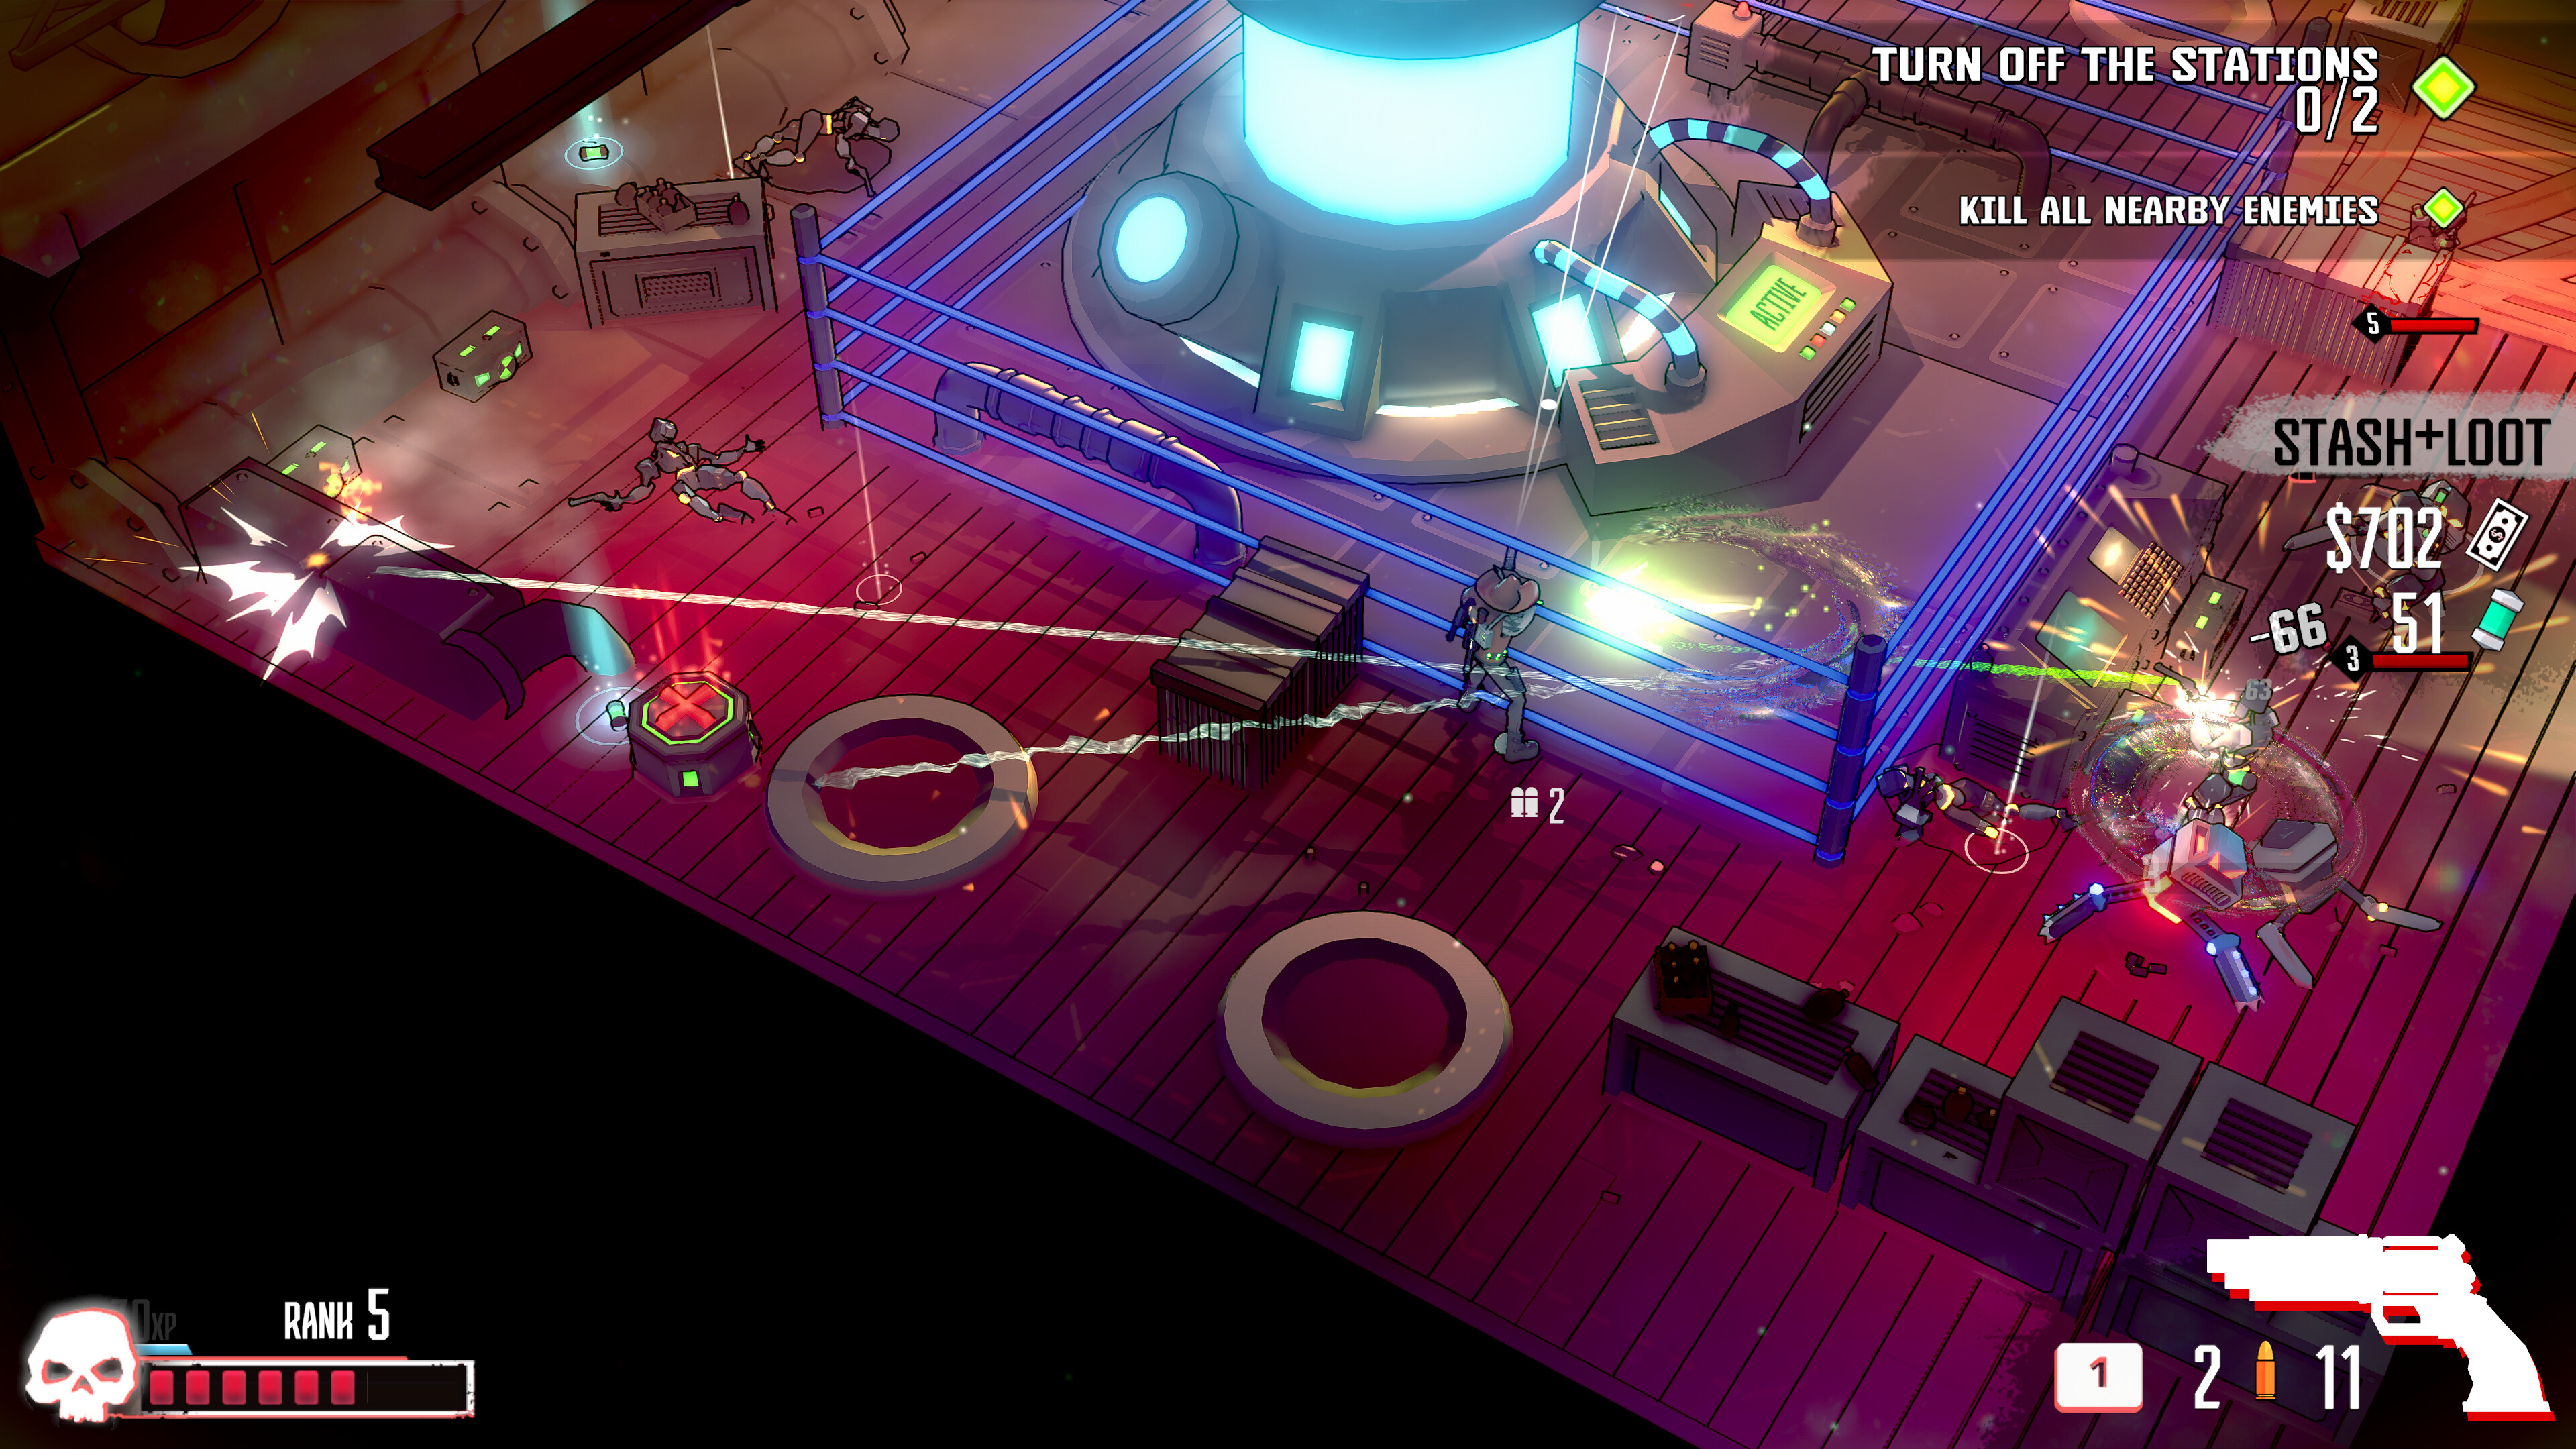 gameplay scene in Dust &amp; Neon; the player character is caught in a crossfire as he tries to take down the electromagnetic gates protecting a generator he is tasked with destroying